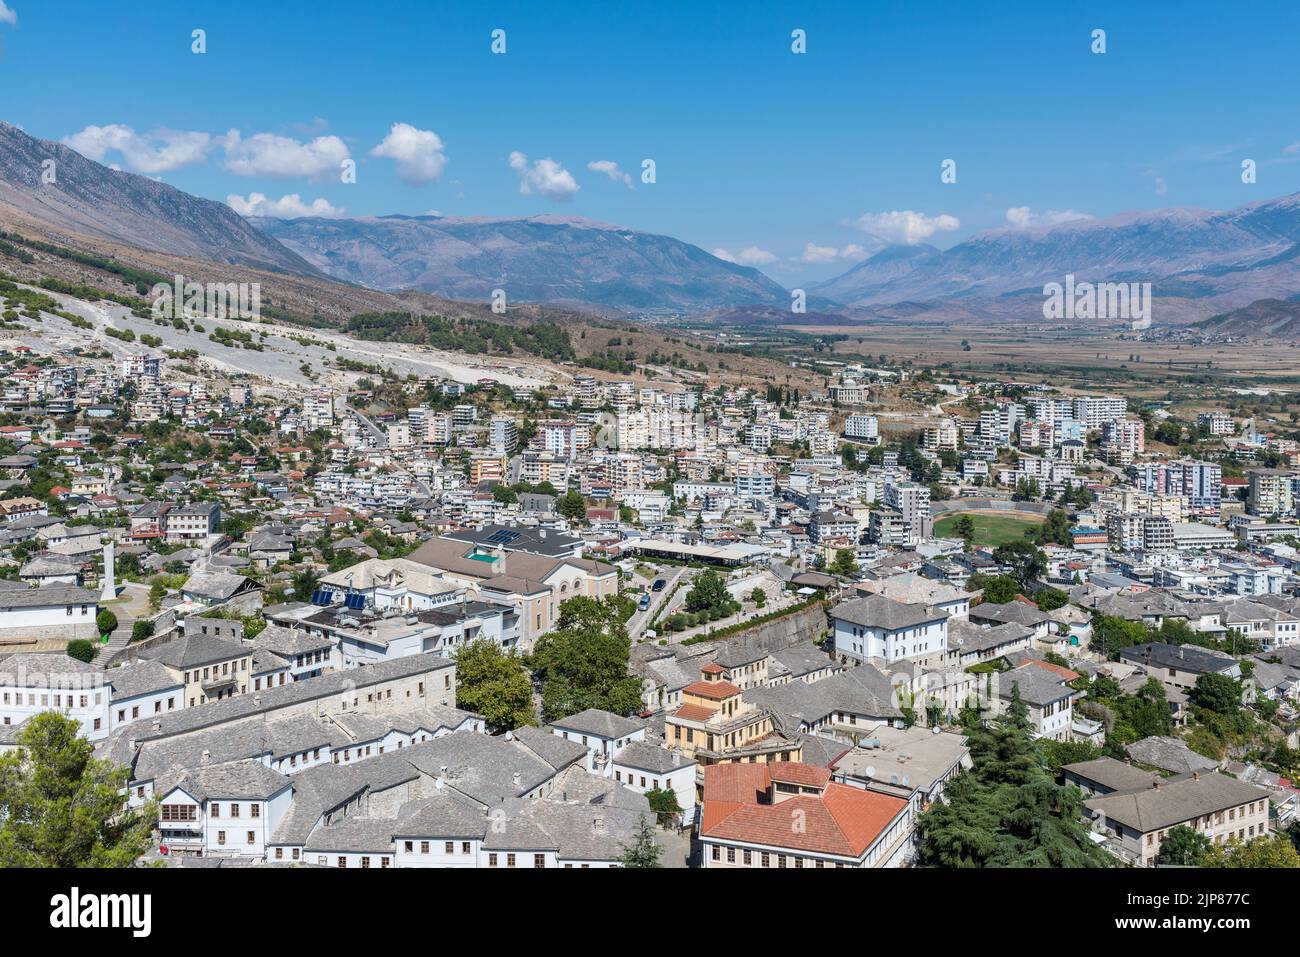 Cityscape of the Old Town of Gjirokaster located on the hills, Albania Stock Photo